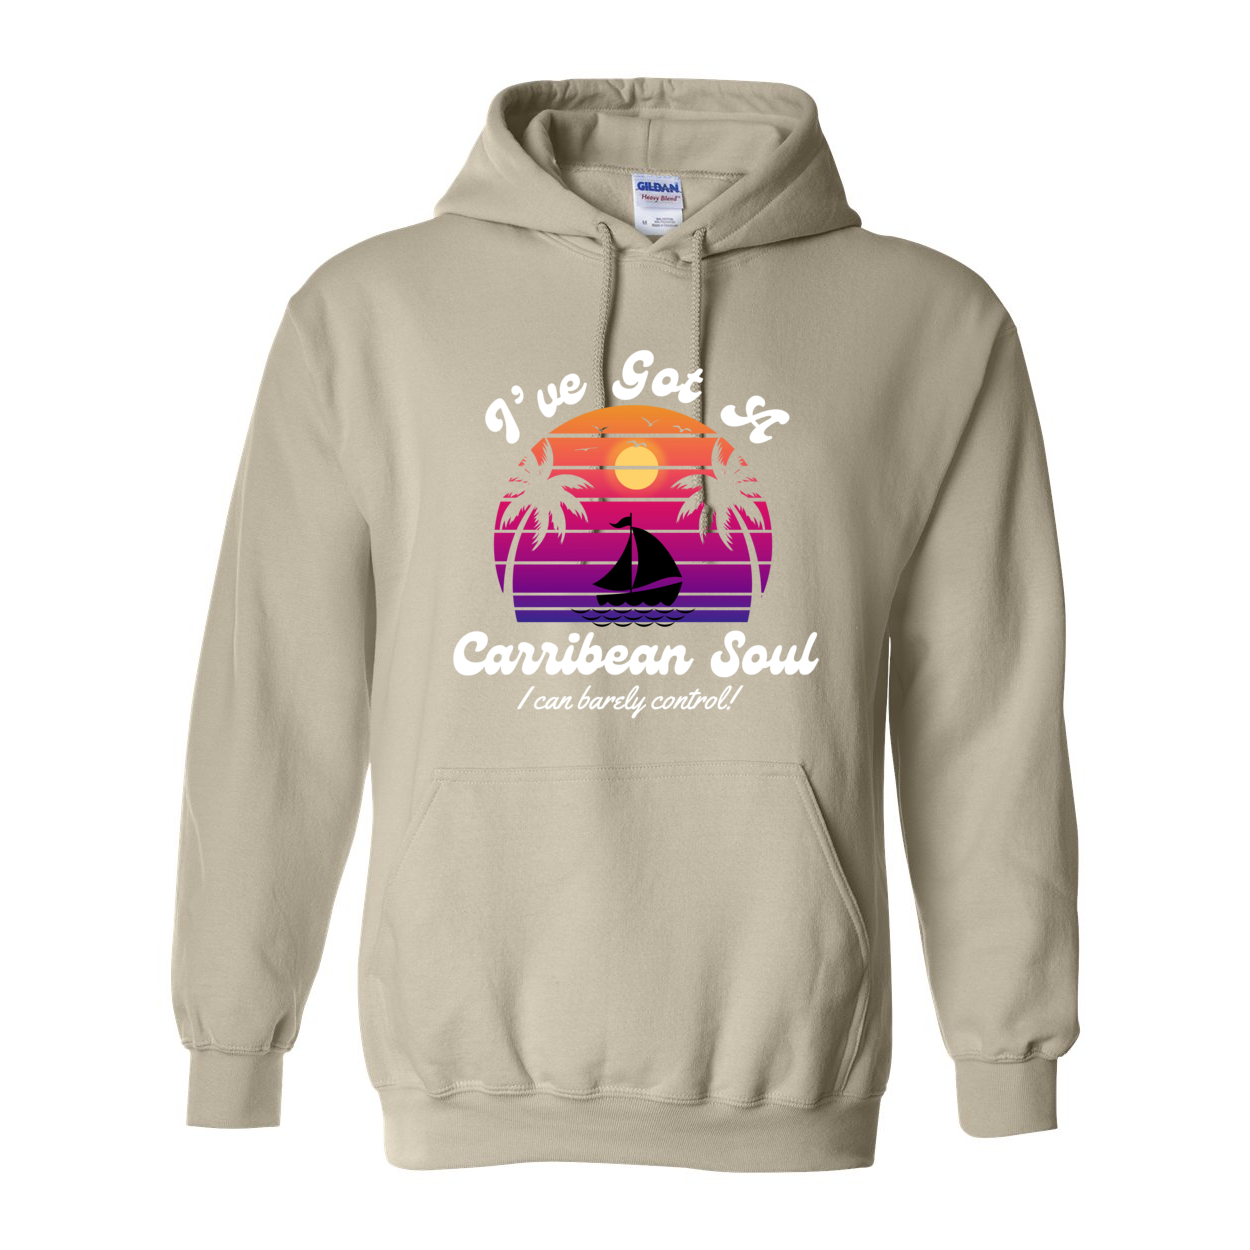 Adult Unisex Carribean Soul Graphic Hoodie